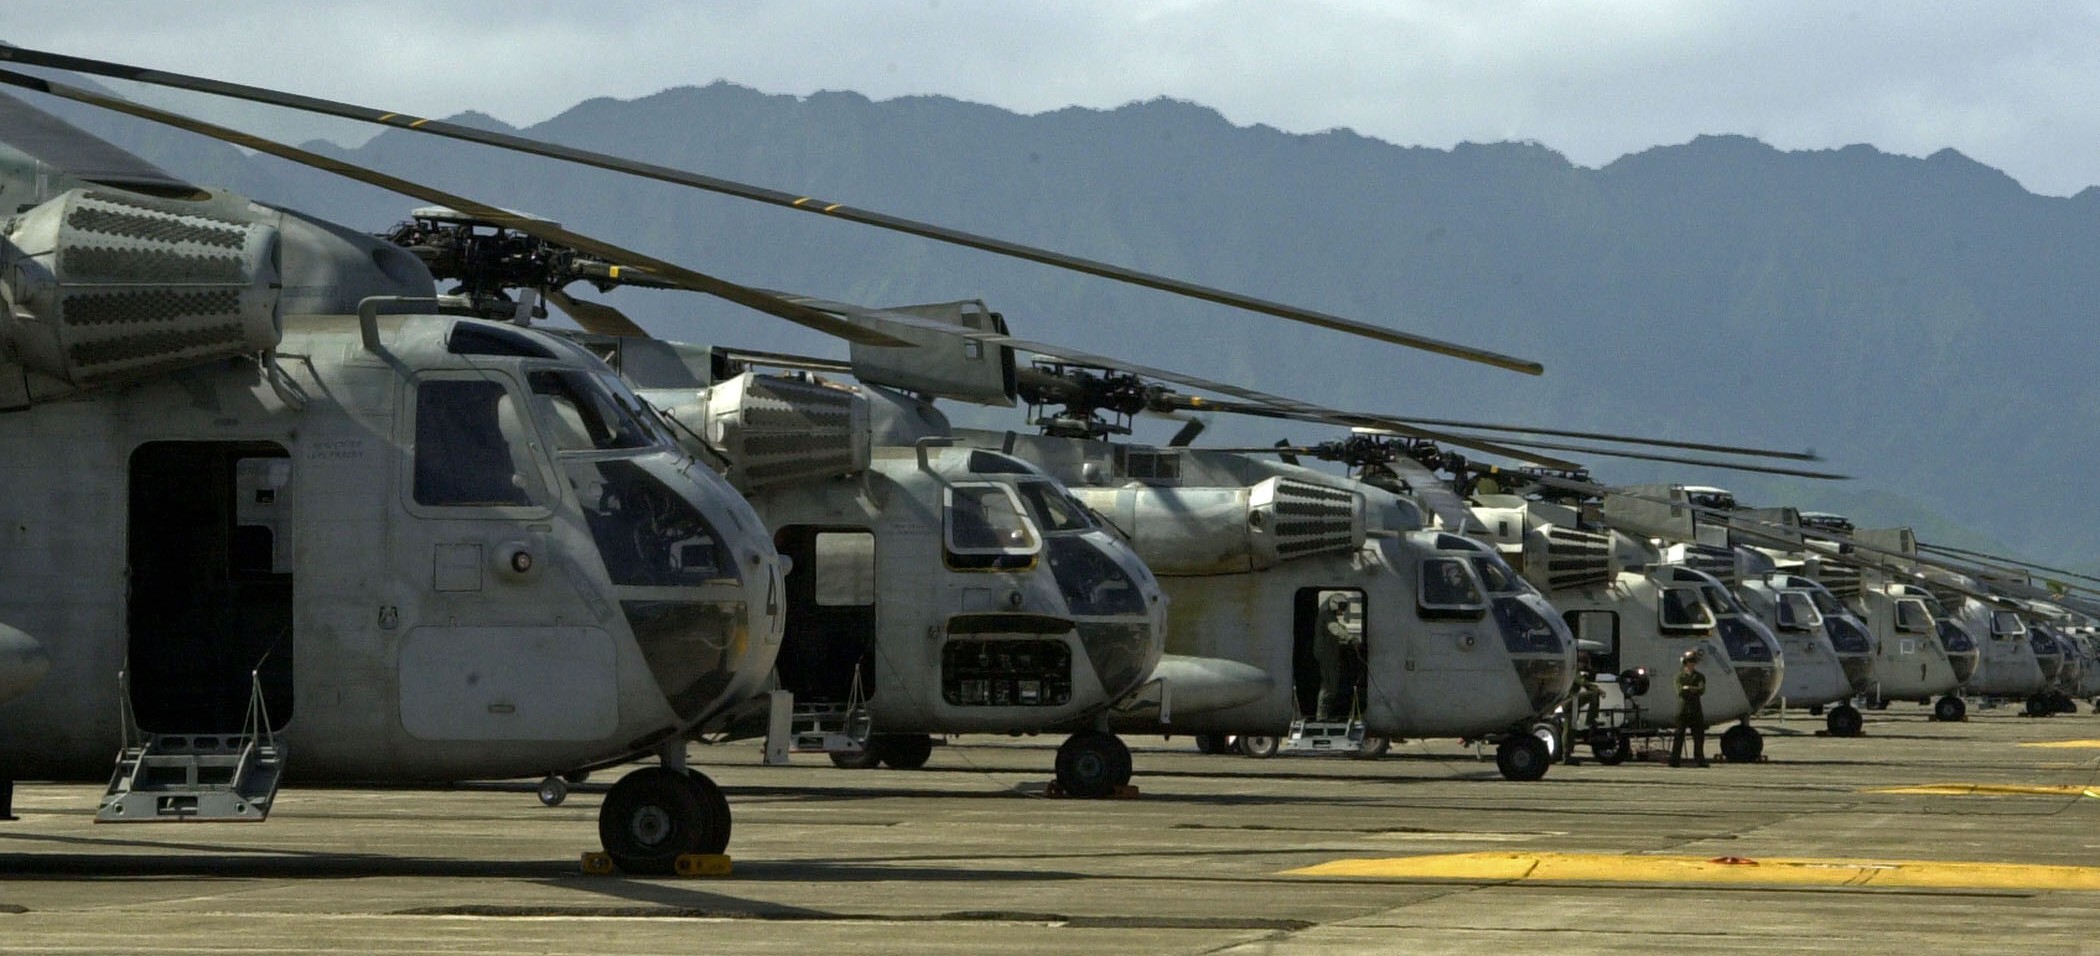 hmh-363 red lions marine heavy helicopter squadron usmc sikorsky ch-53d sea stallion 08 mcb hawaii kaneohe bay